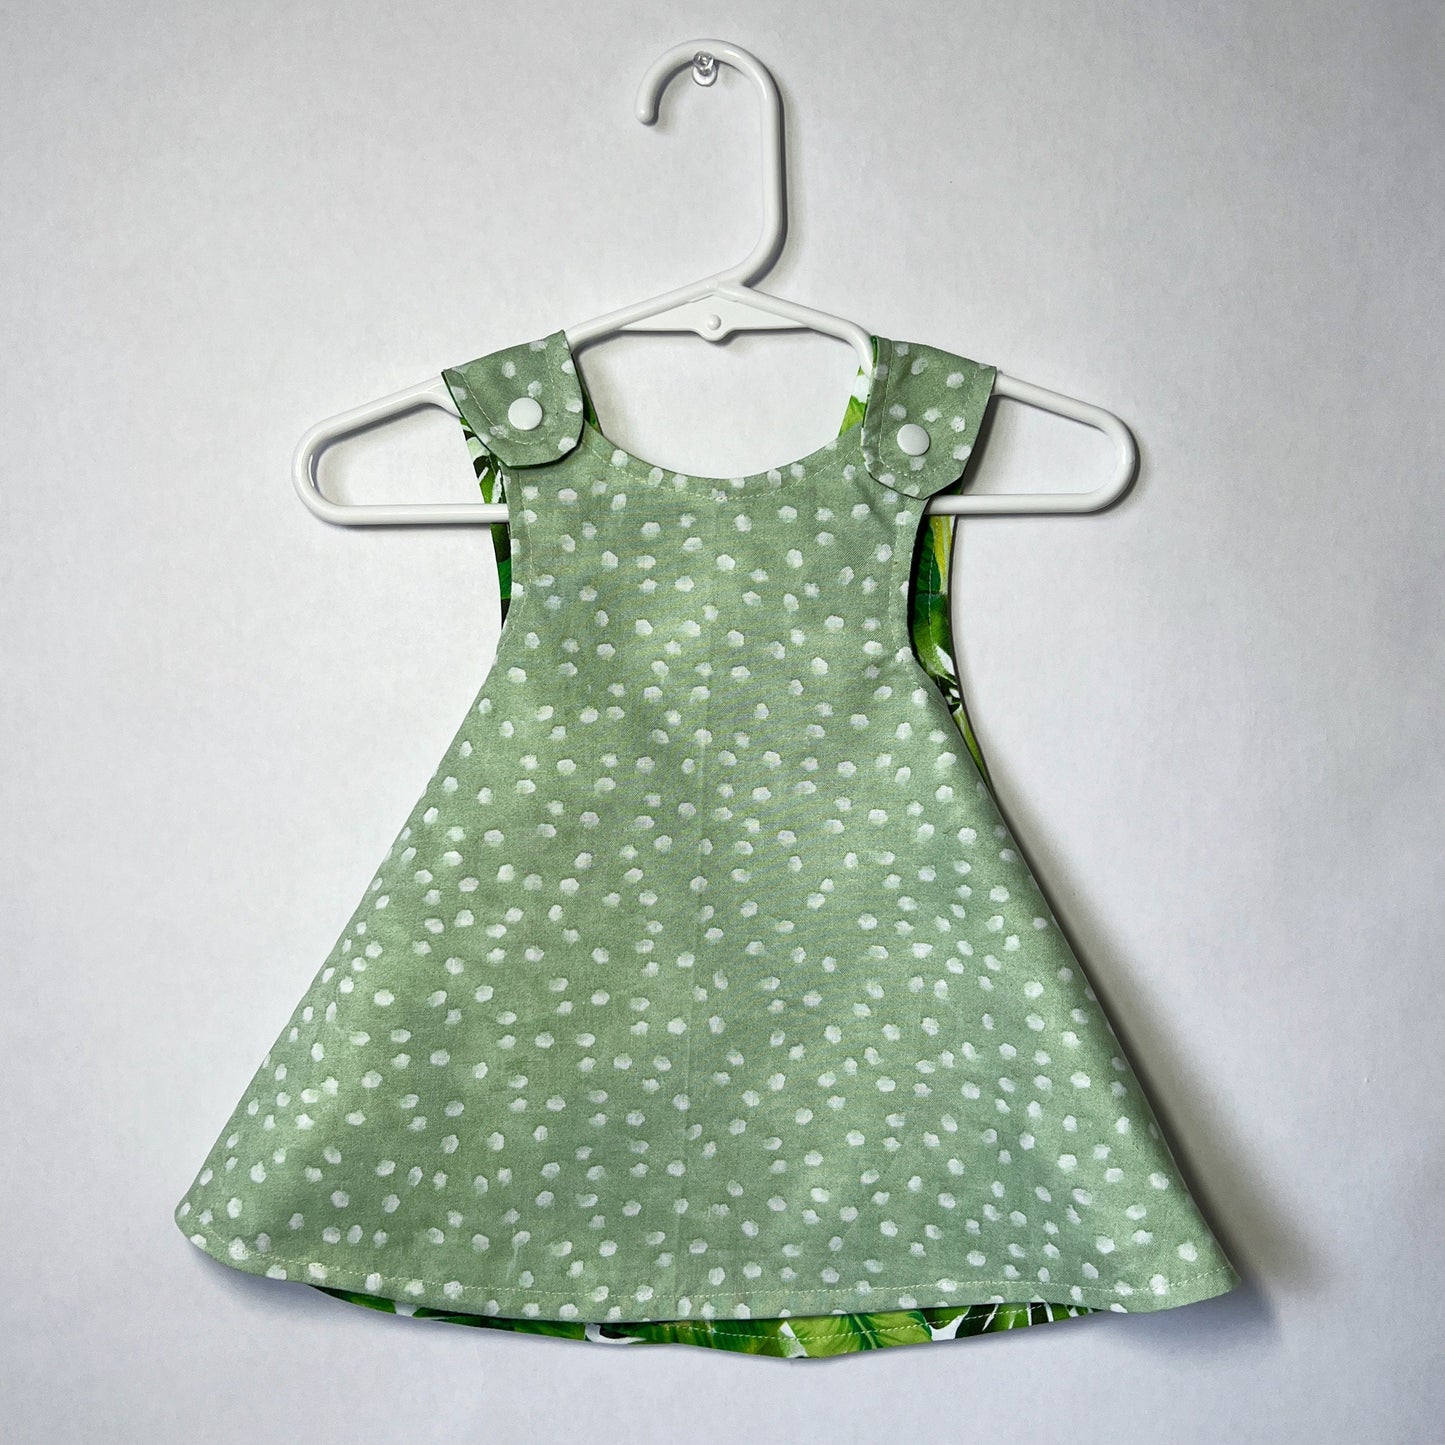 Reversible cotton dress “Polka dots and Tropical leaves”